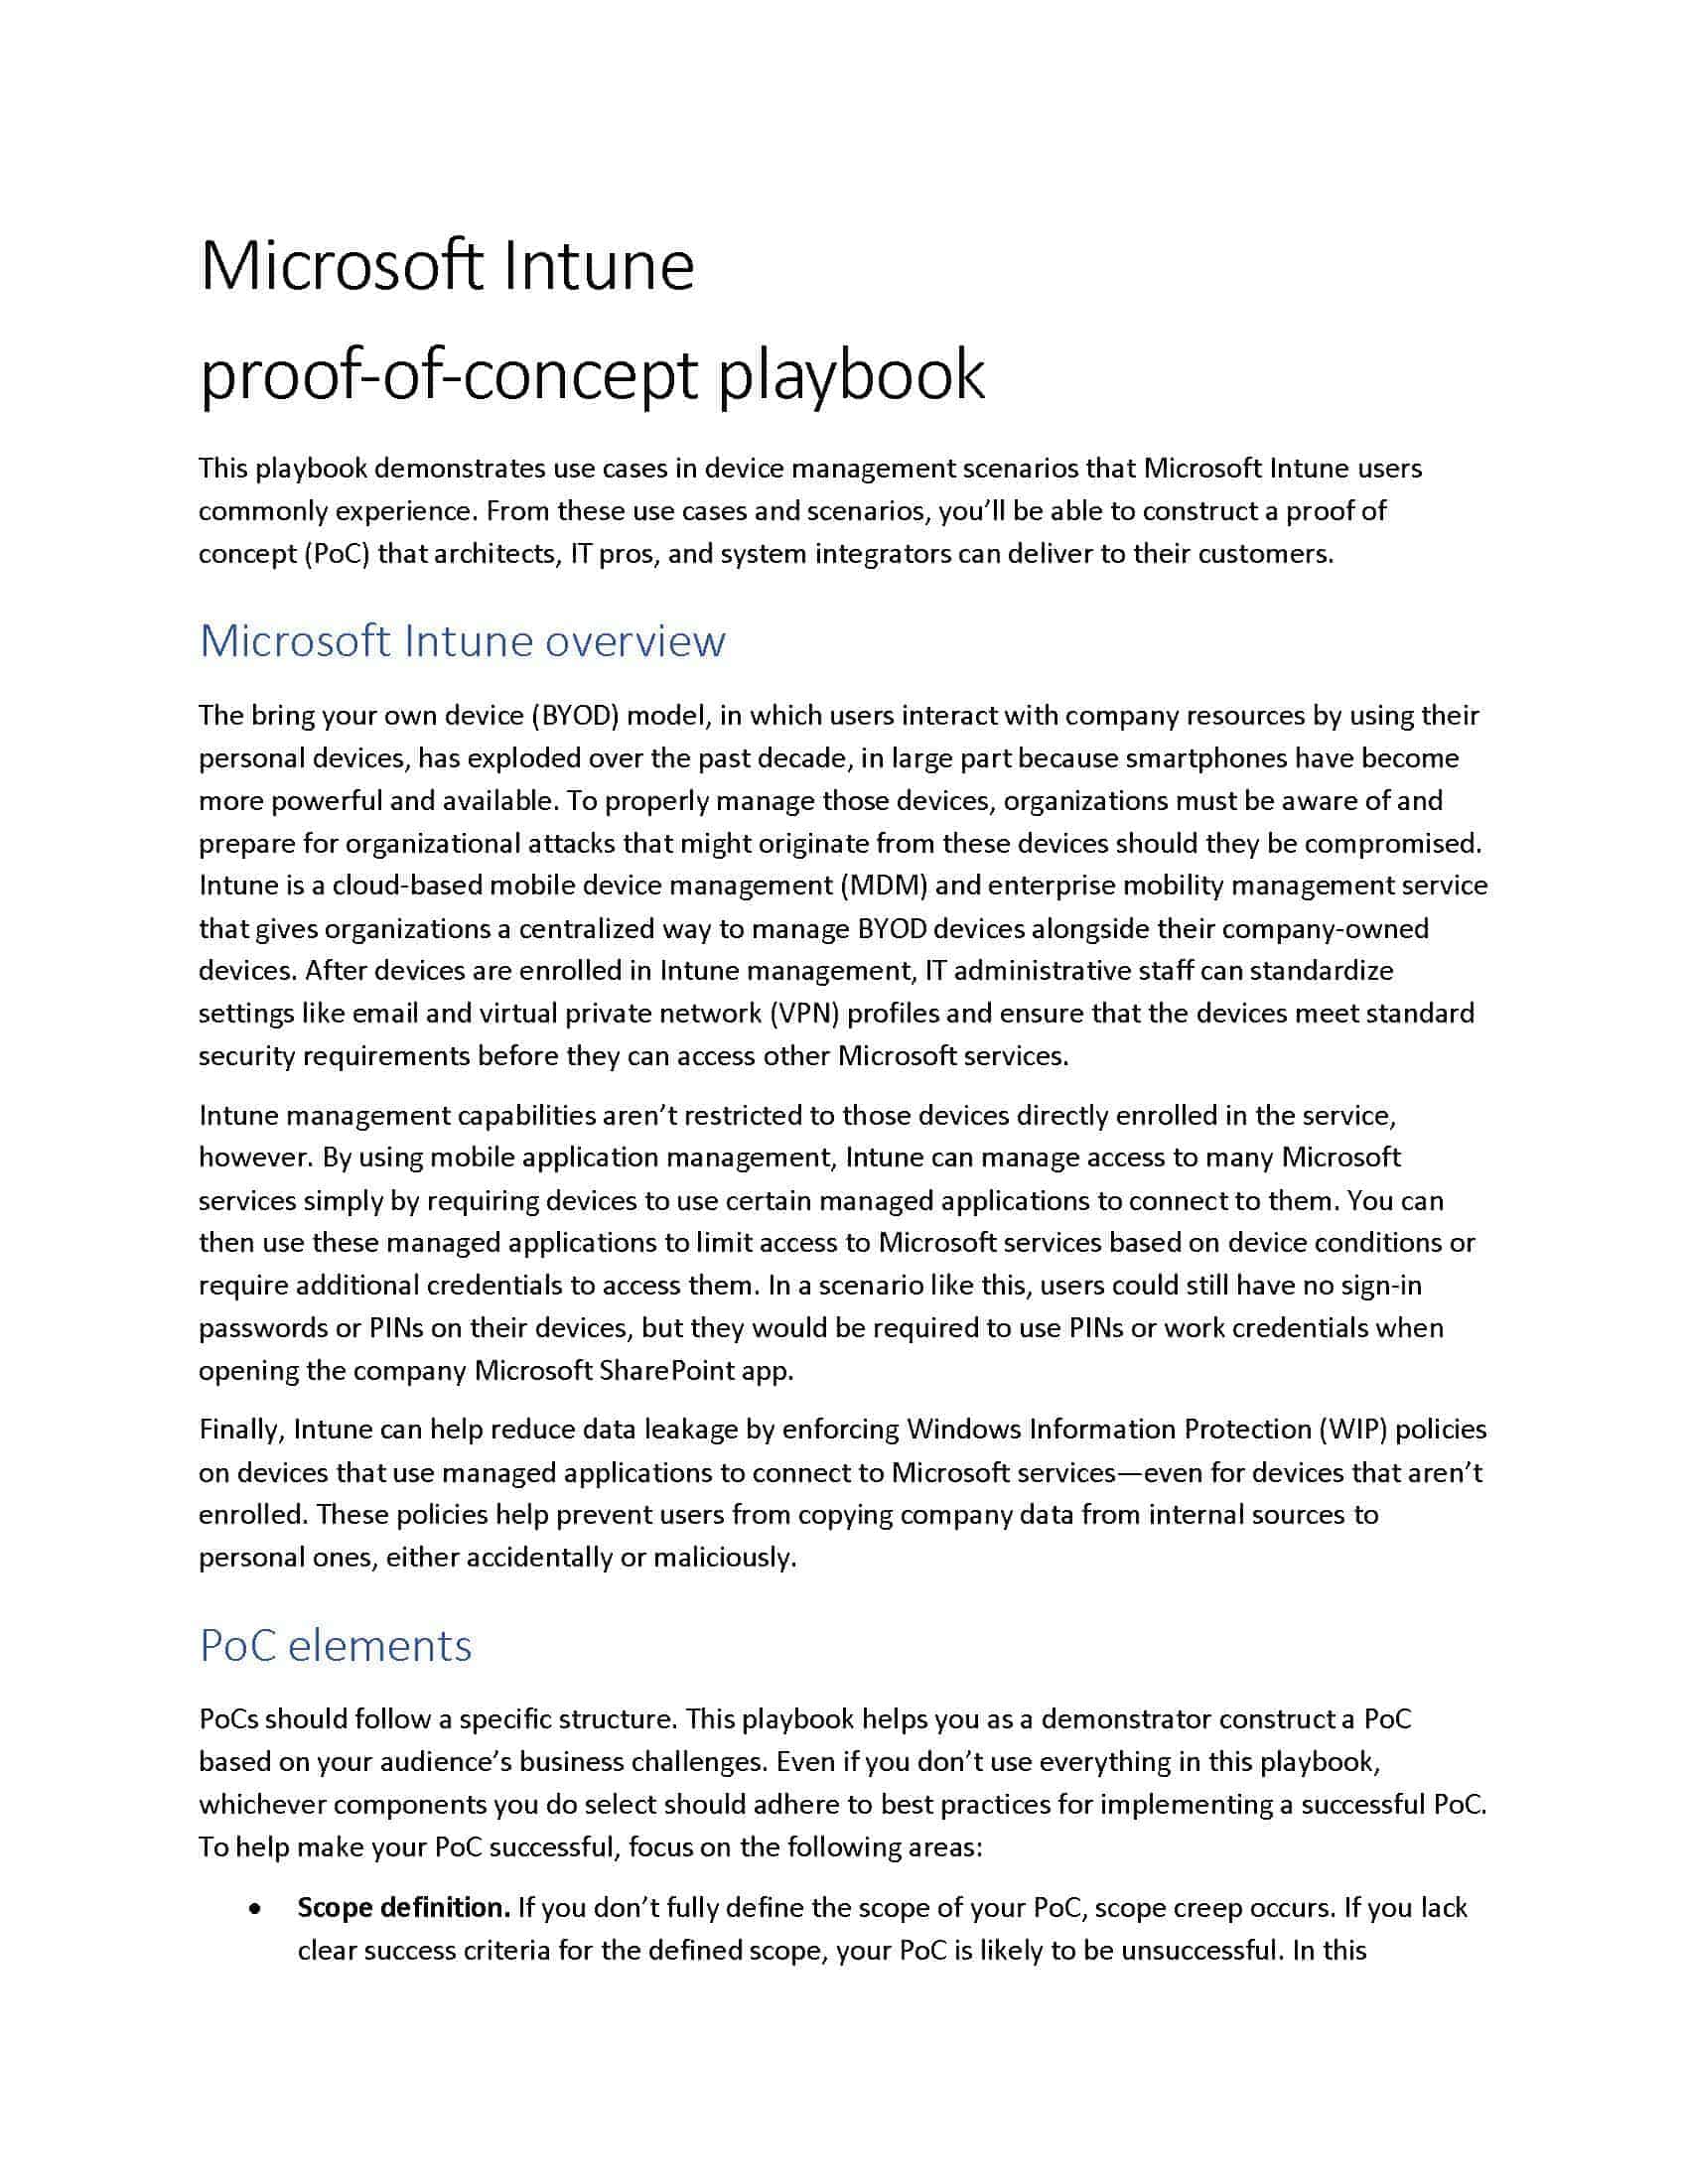 Page 1 from the Microsoft Intune proof of concept (PoC) playbook